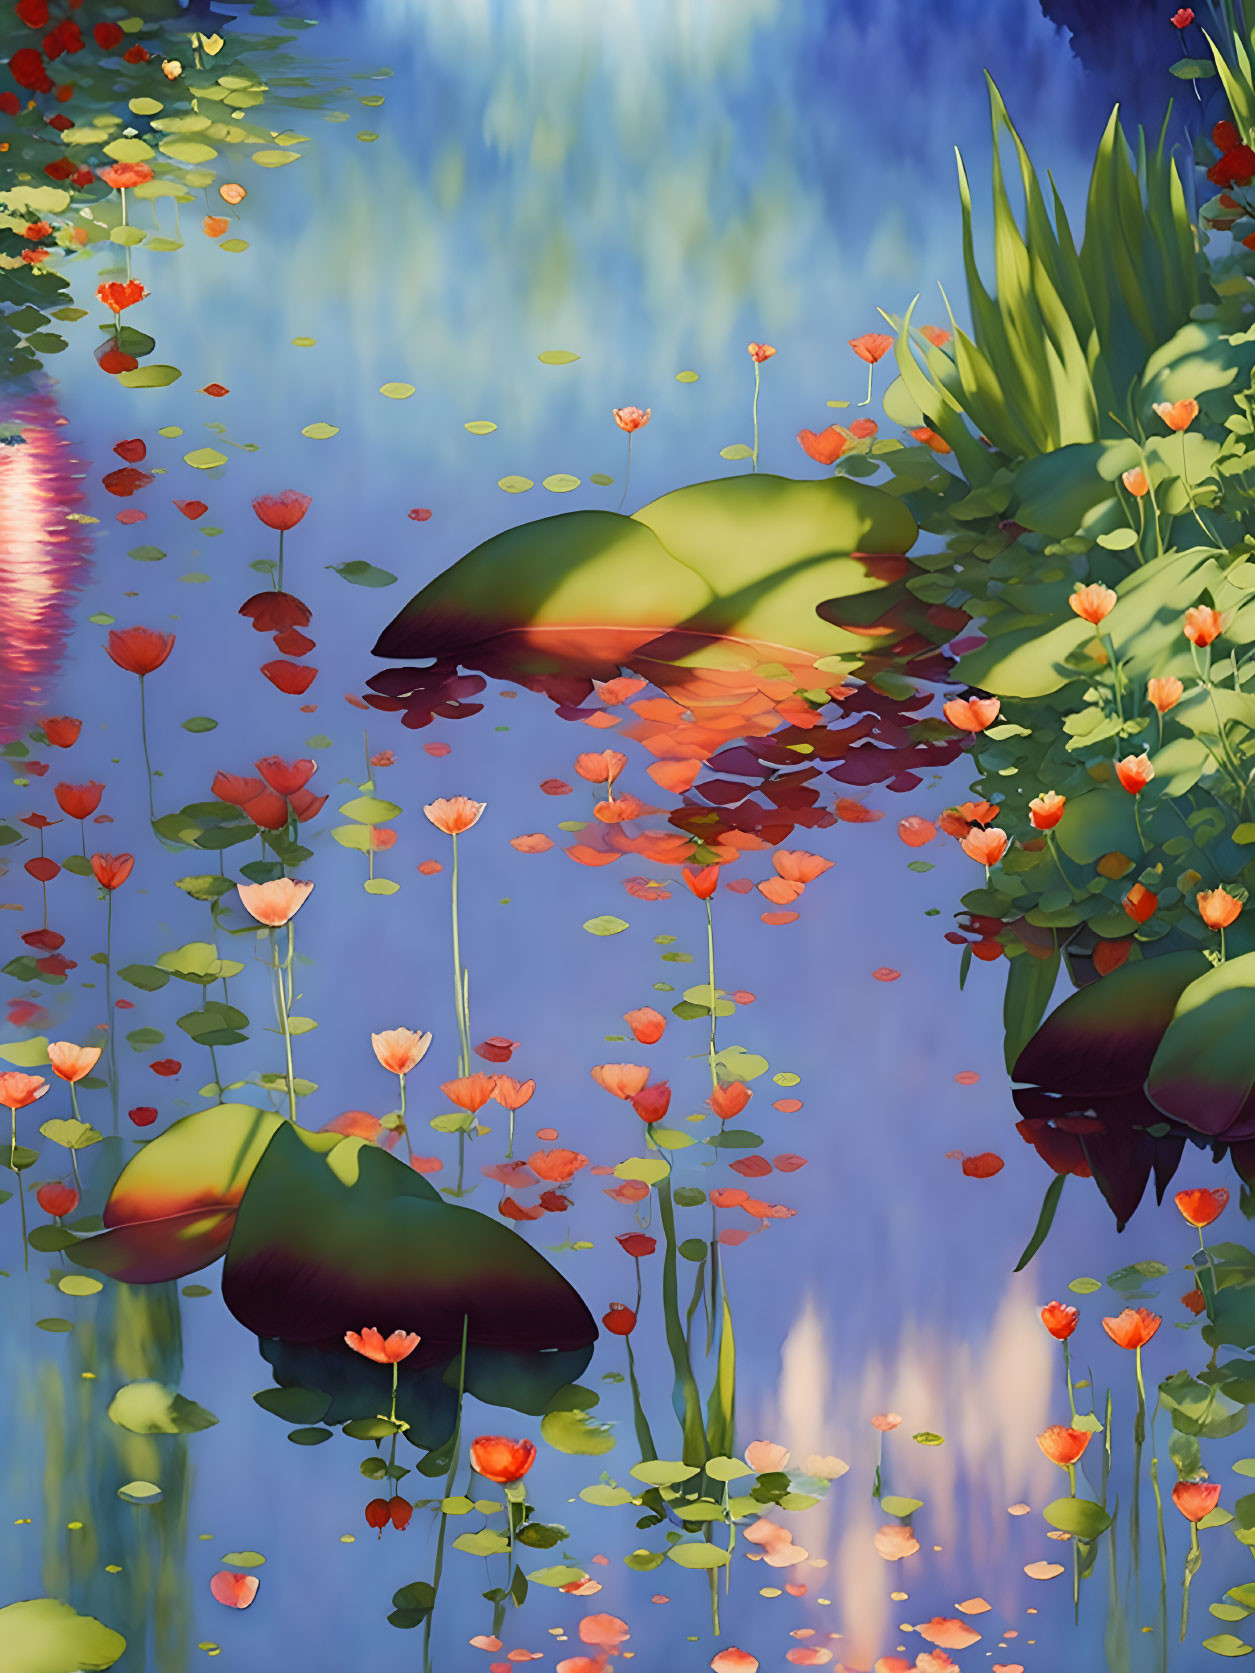 Tranquil digital art of koi pond with lilies, fish, and aquatic plants